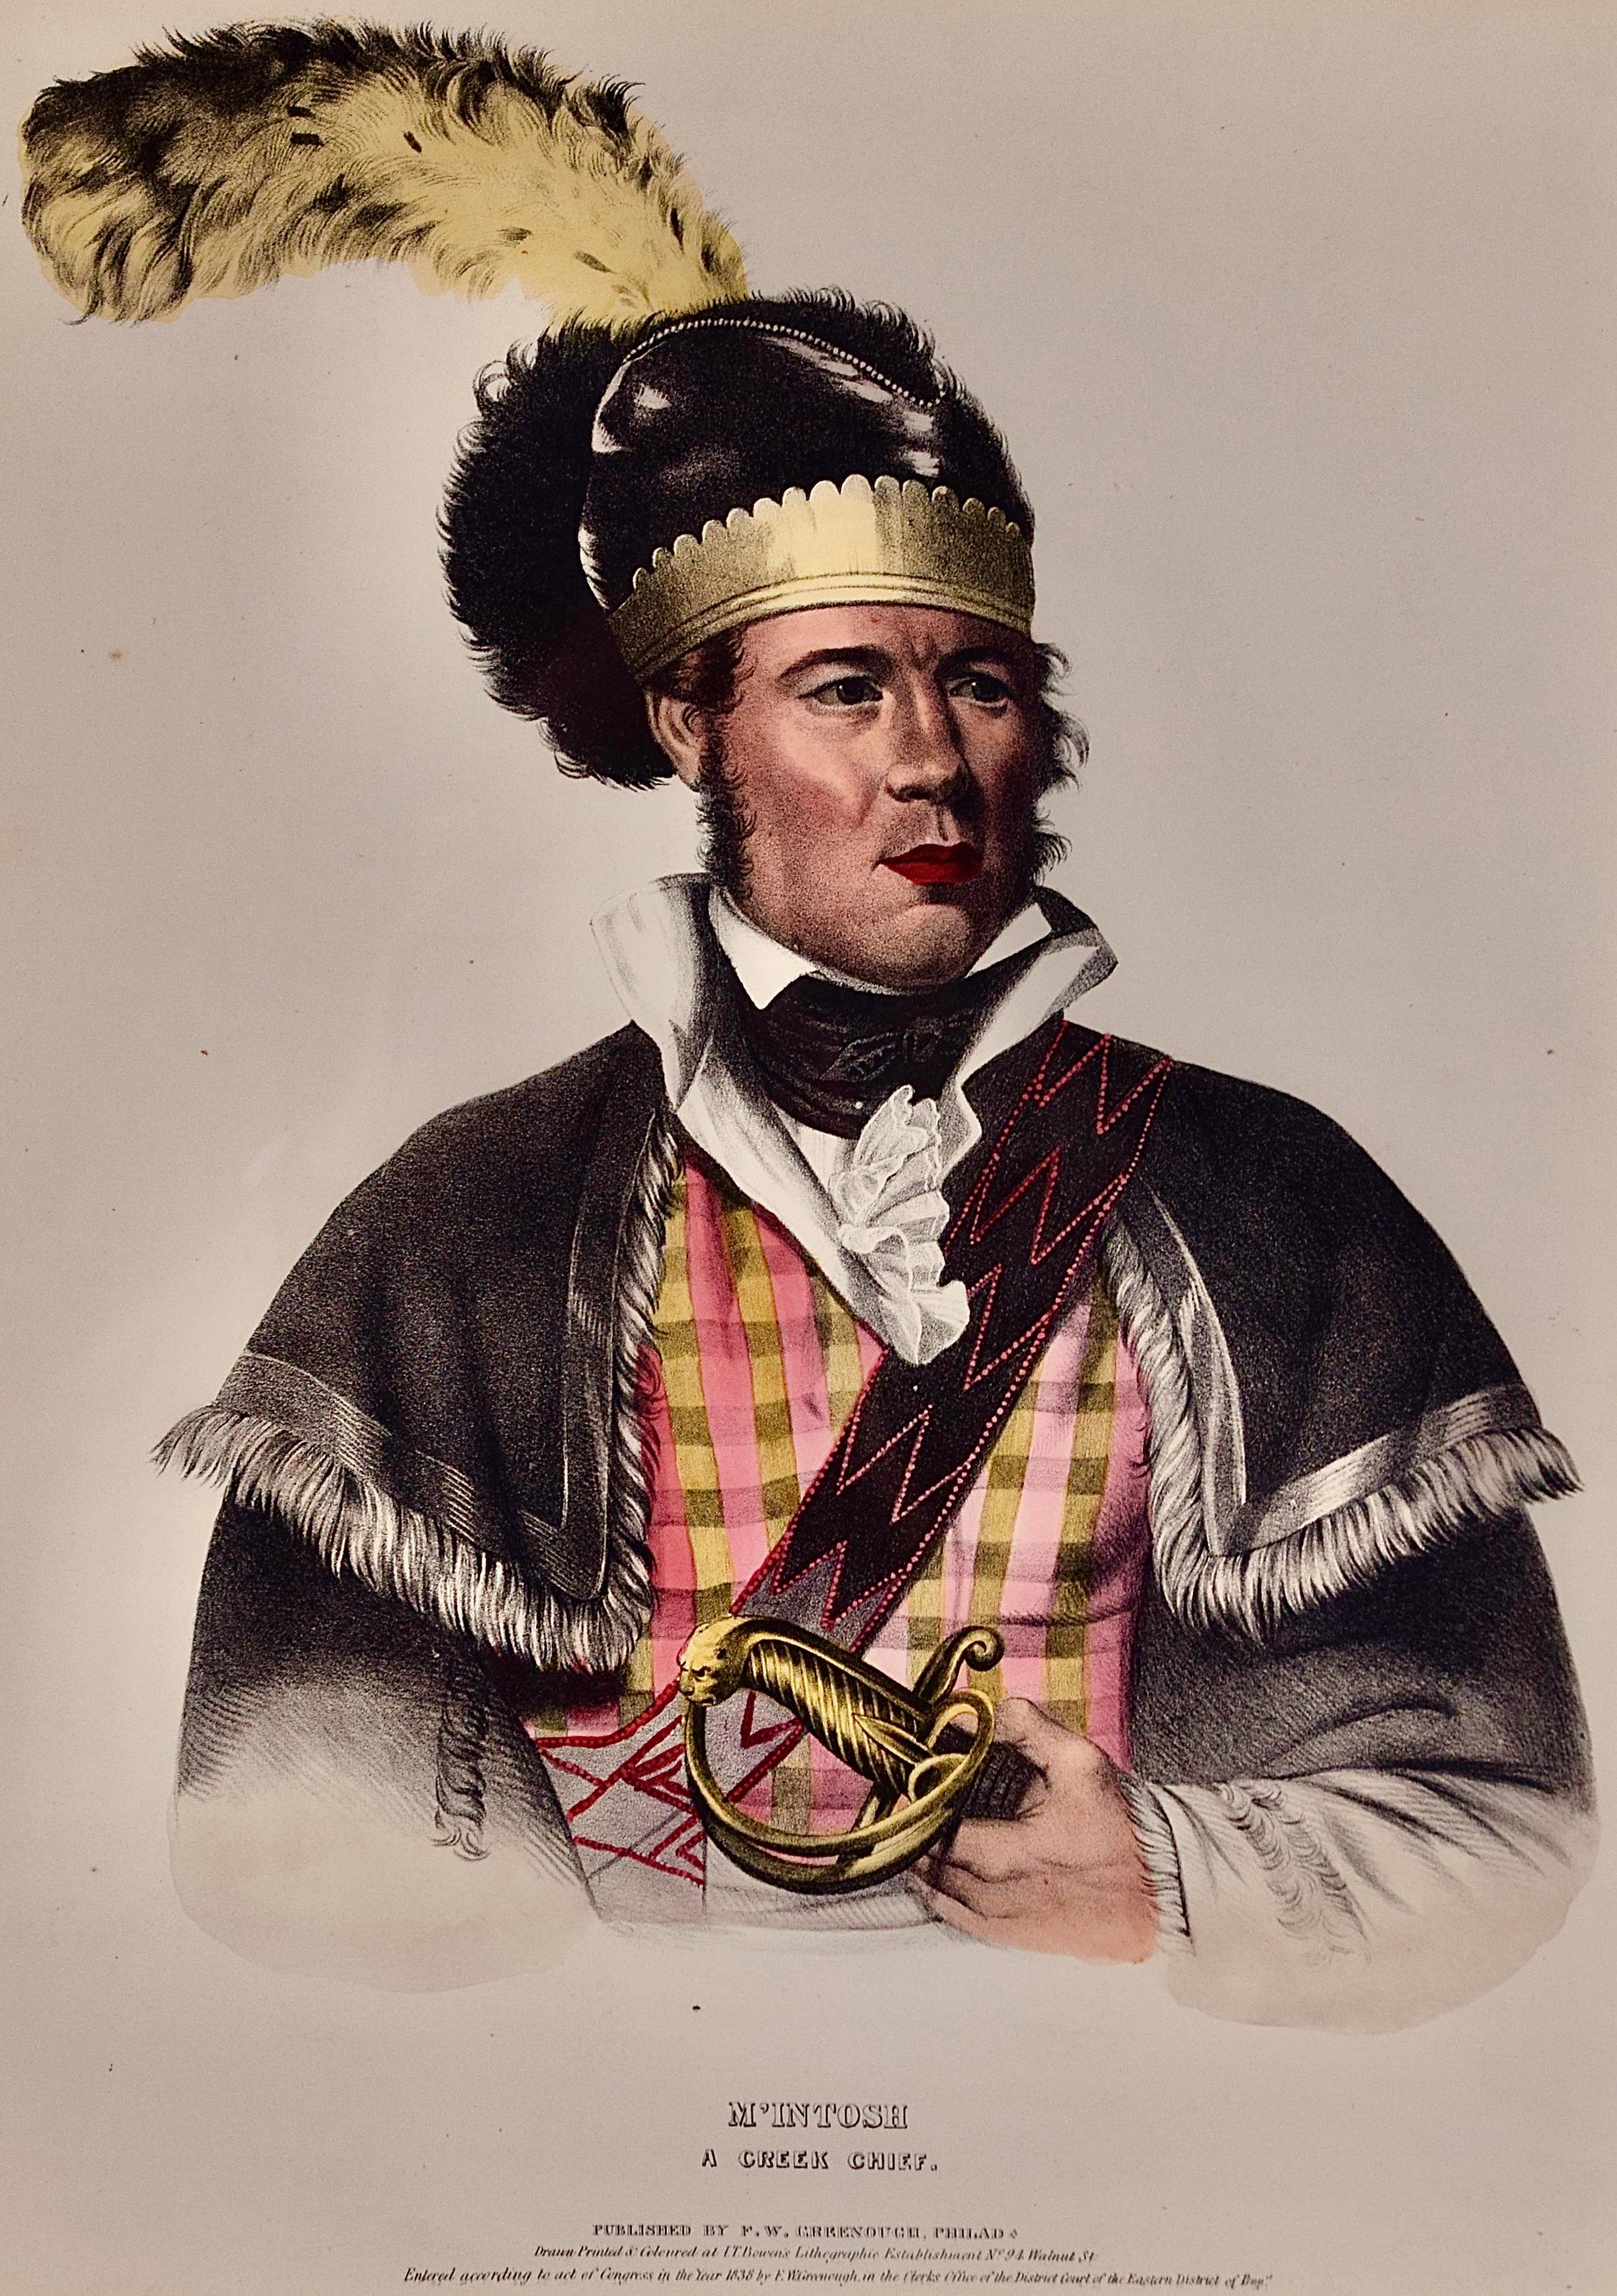 McIntosh, A Creek Chief: Framed Hand-colored McKenney Folio-sized Lithograph - Print by McKenney & Hall